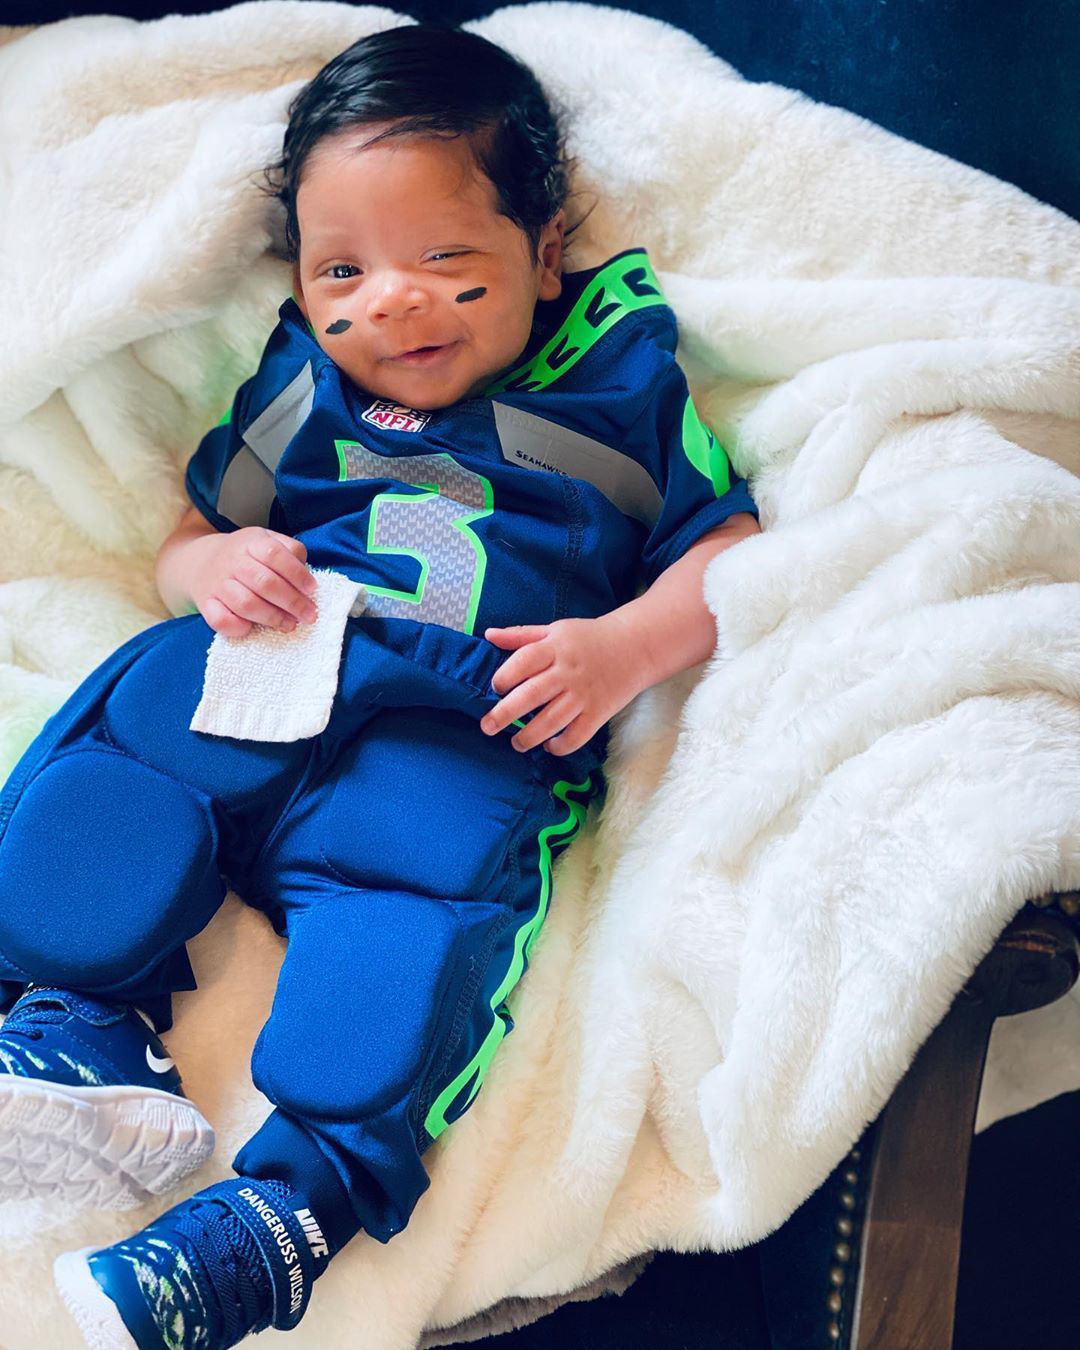 Ciara Dresses Son In Football Uniform Ahead Of Russell Wilson S Game